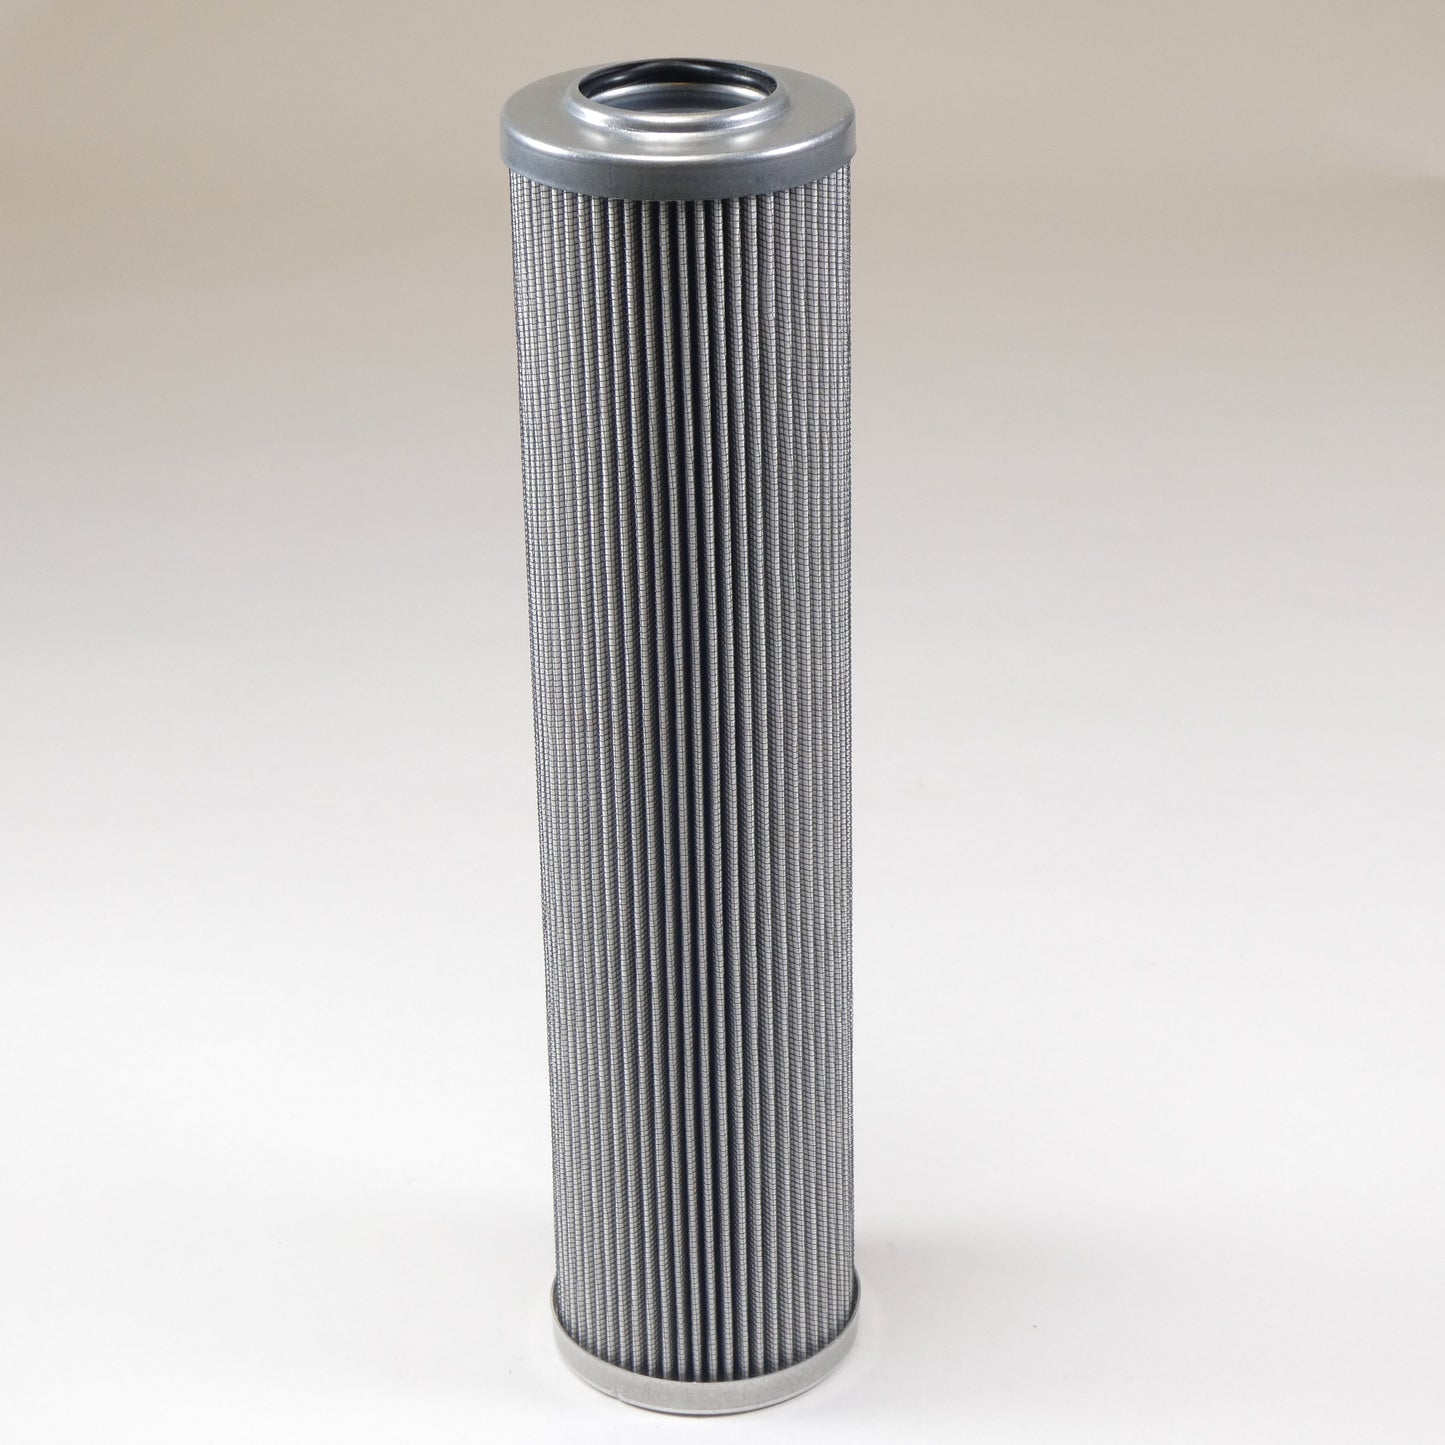 Hydrafil Replacement Filter Element for Hilco 3830-11-099-C